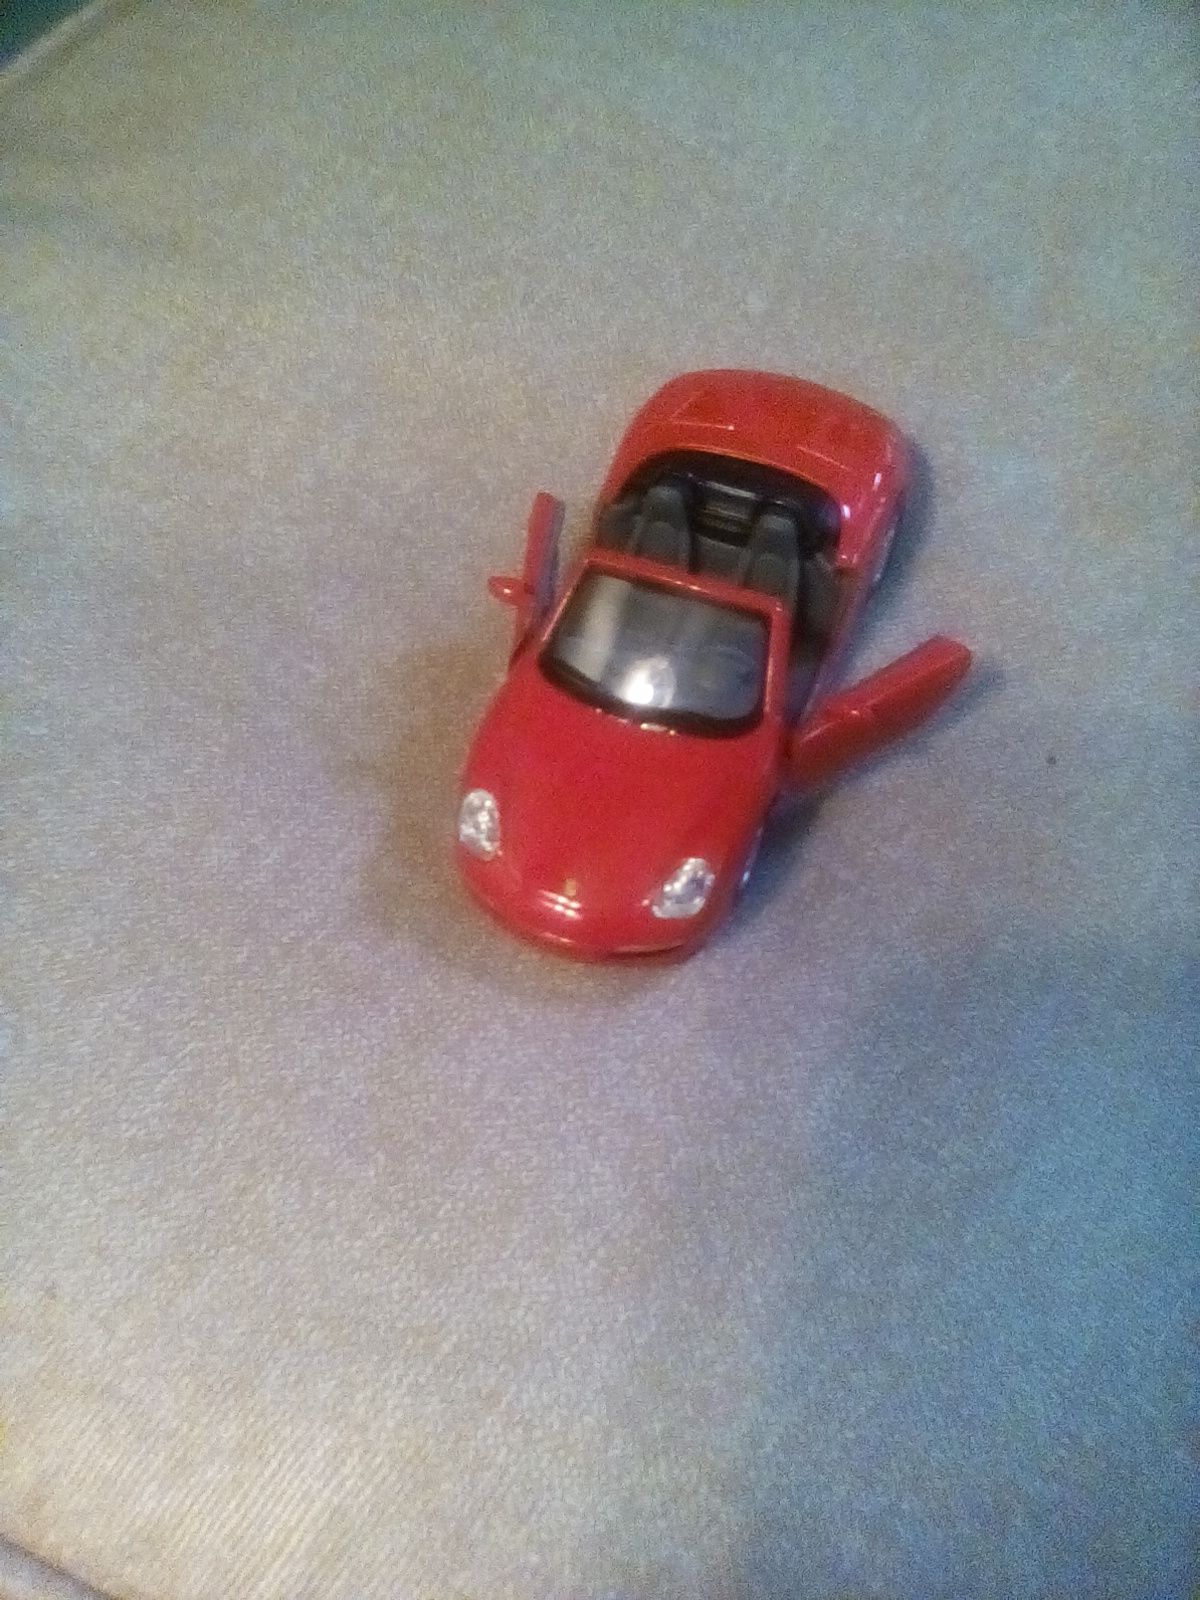 Collectible small toy car